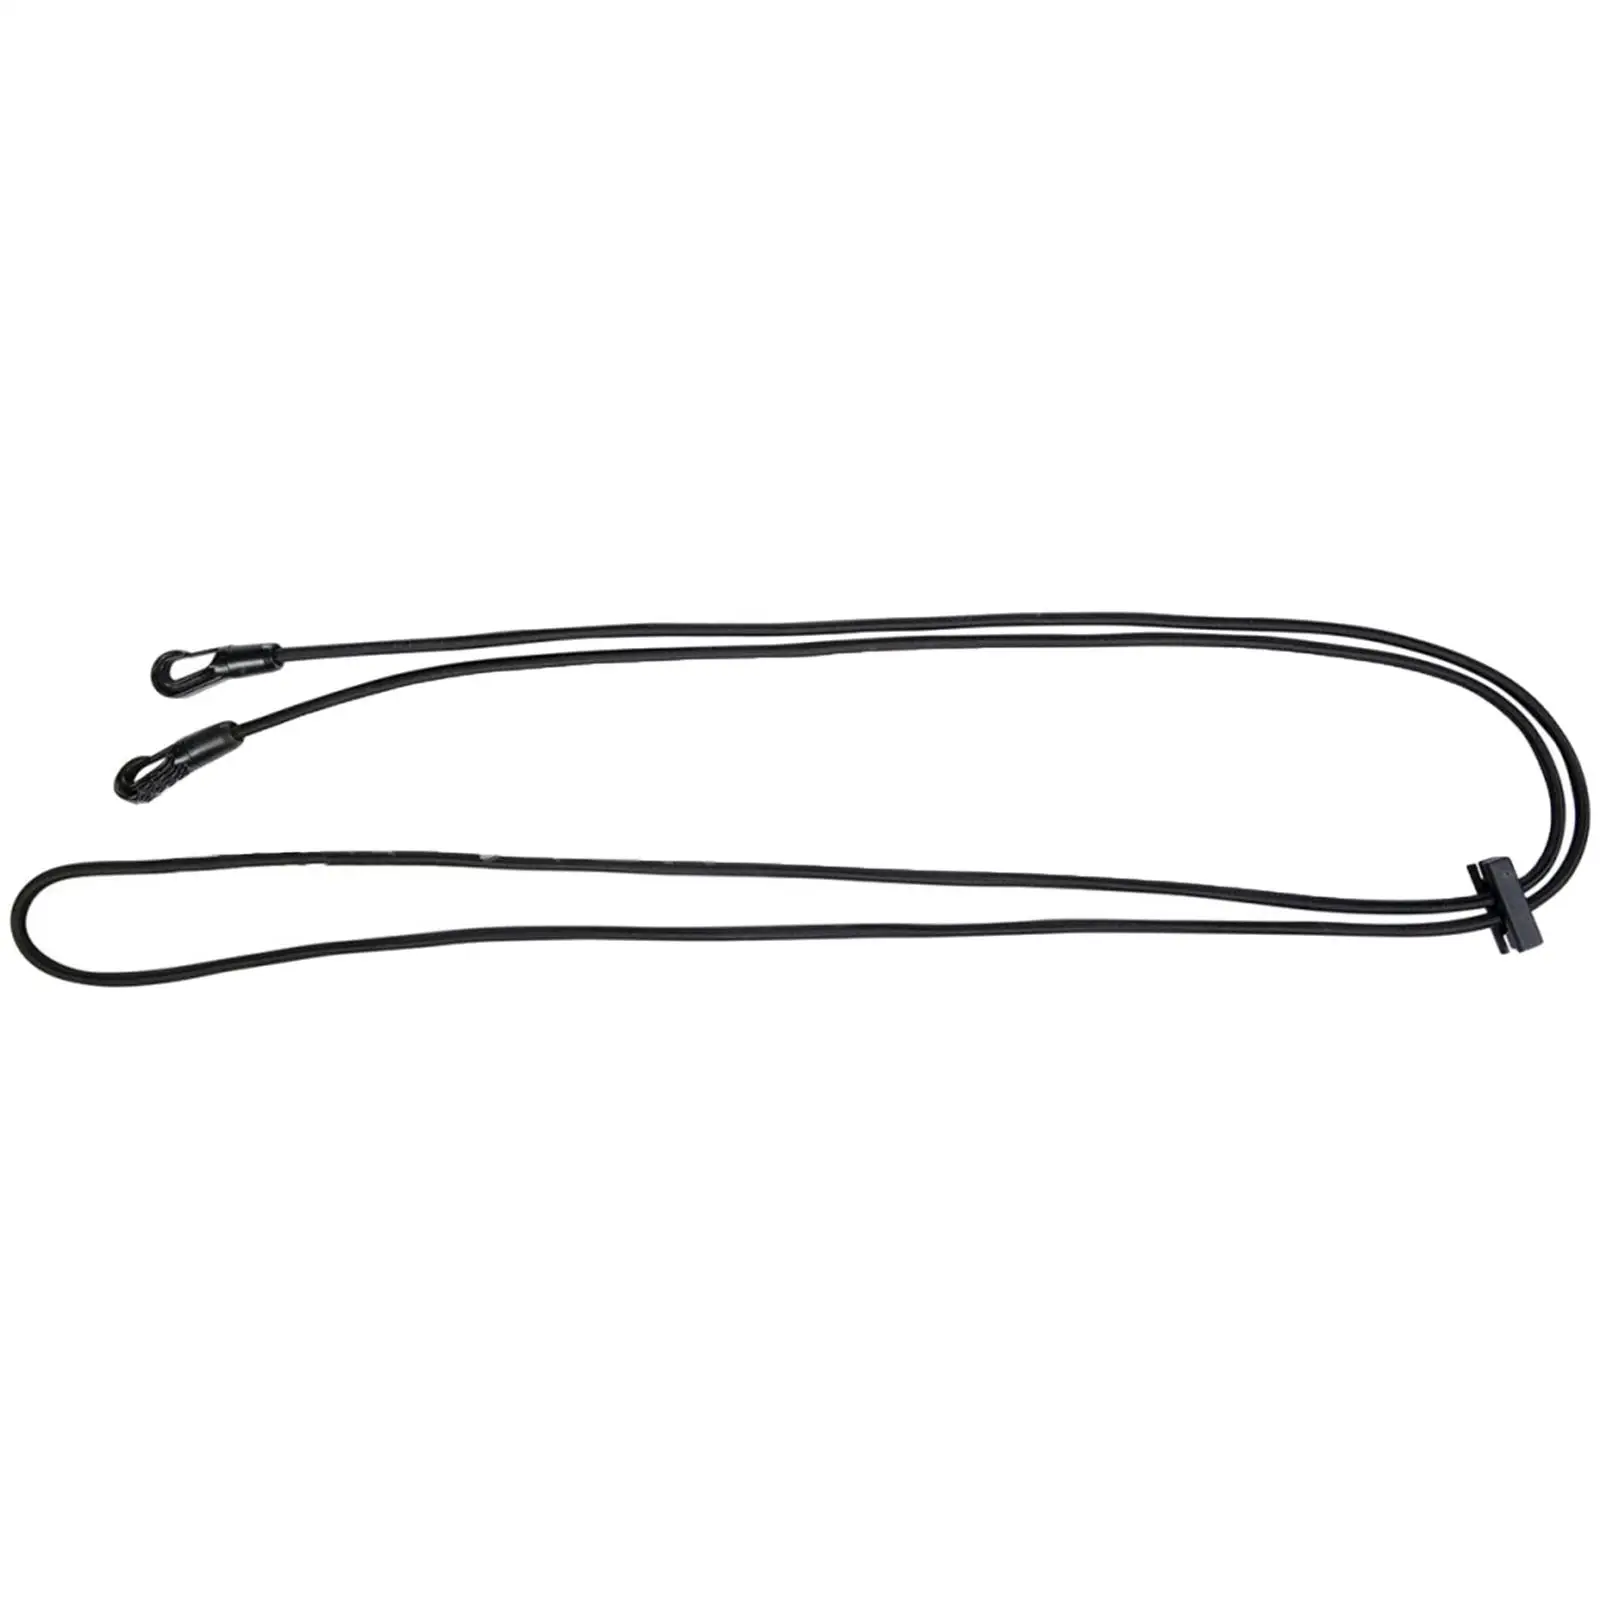 Horse Rein Rope stretcher Equestrian Supplies for Training Aid Practice